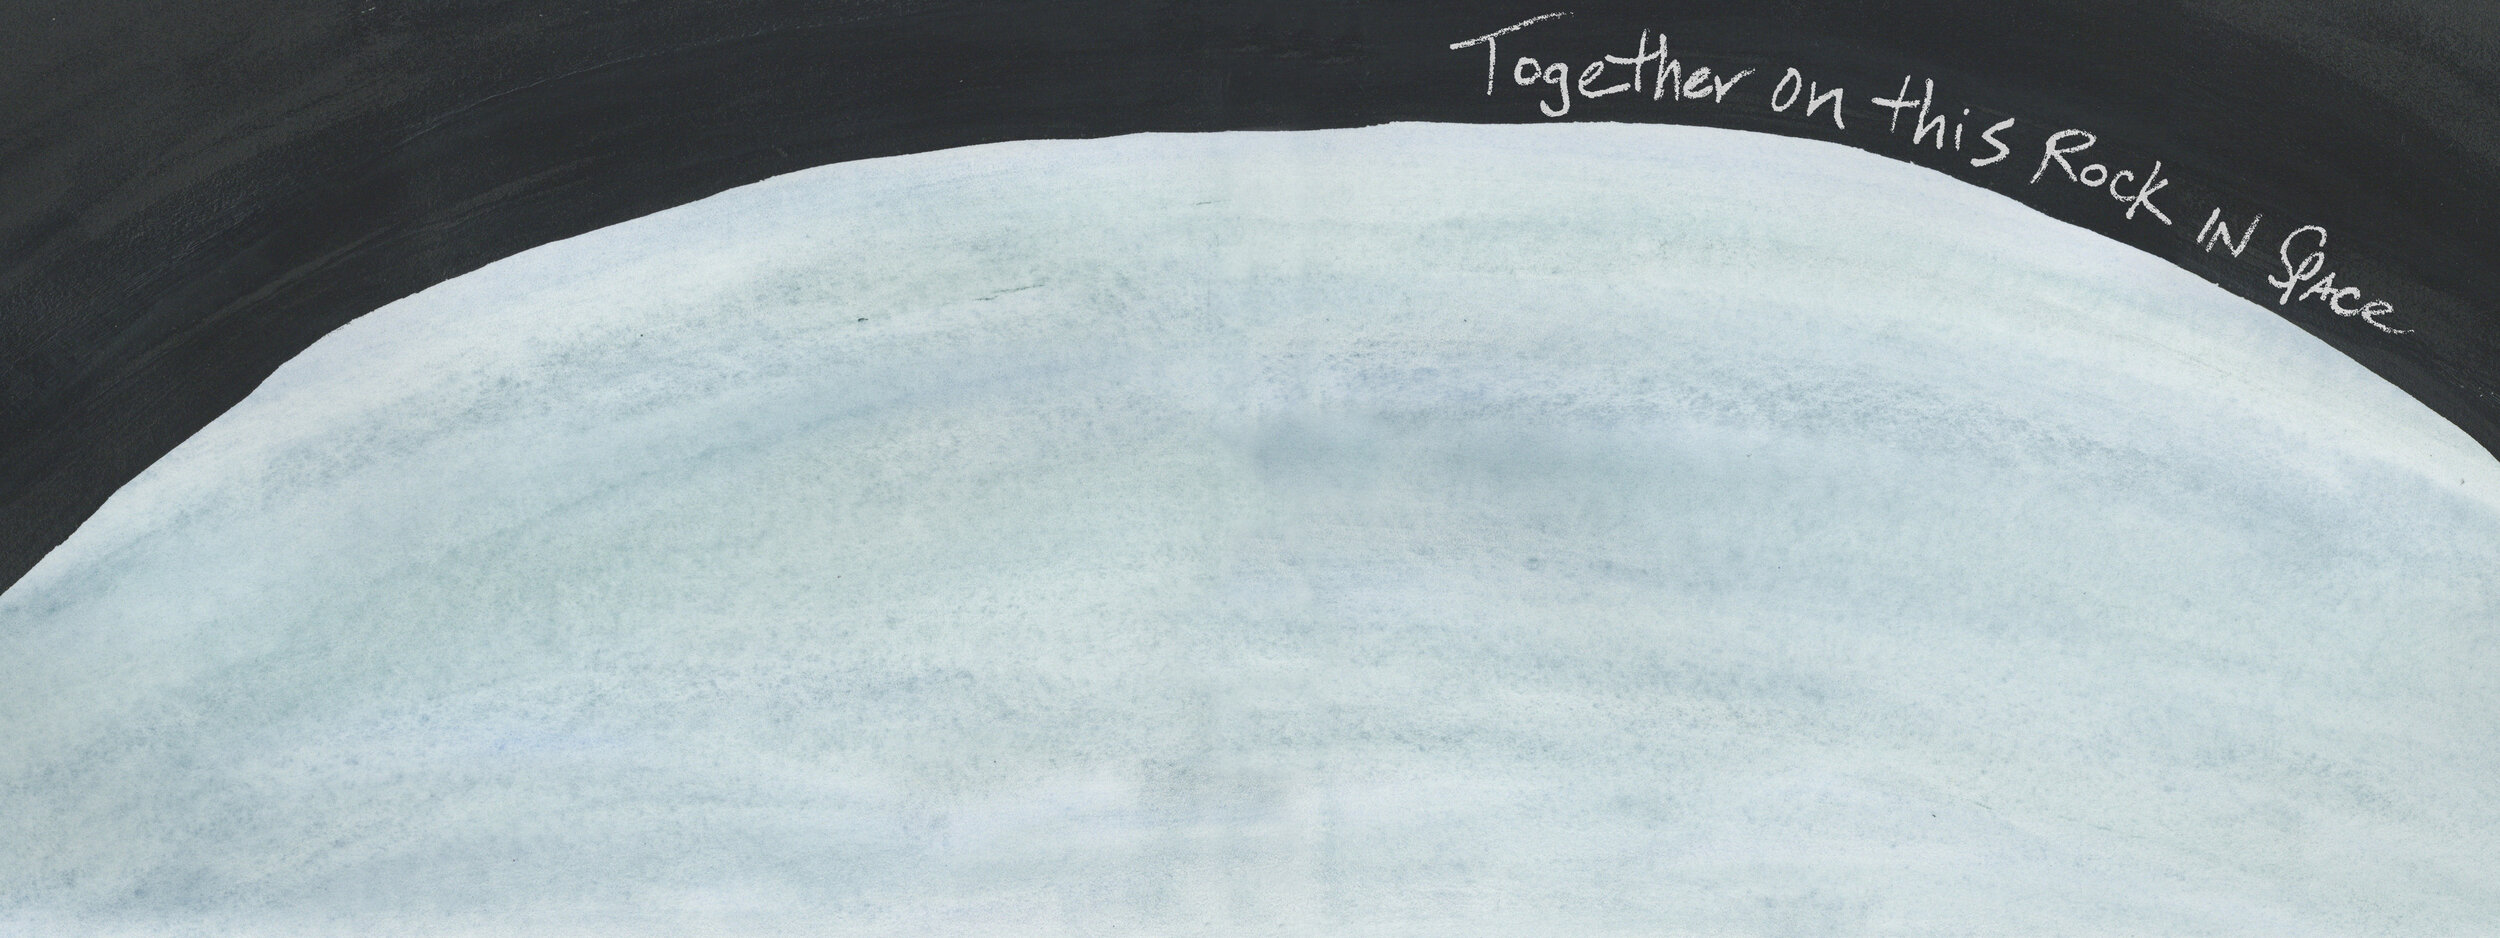 14_Together Rock in Space__RS.jpg